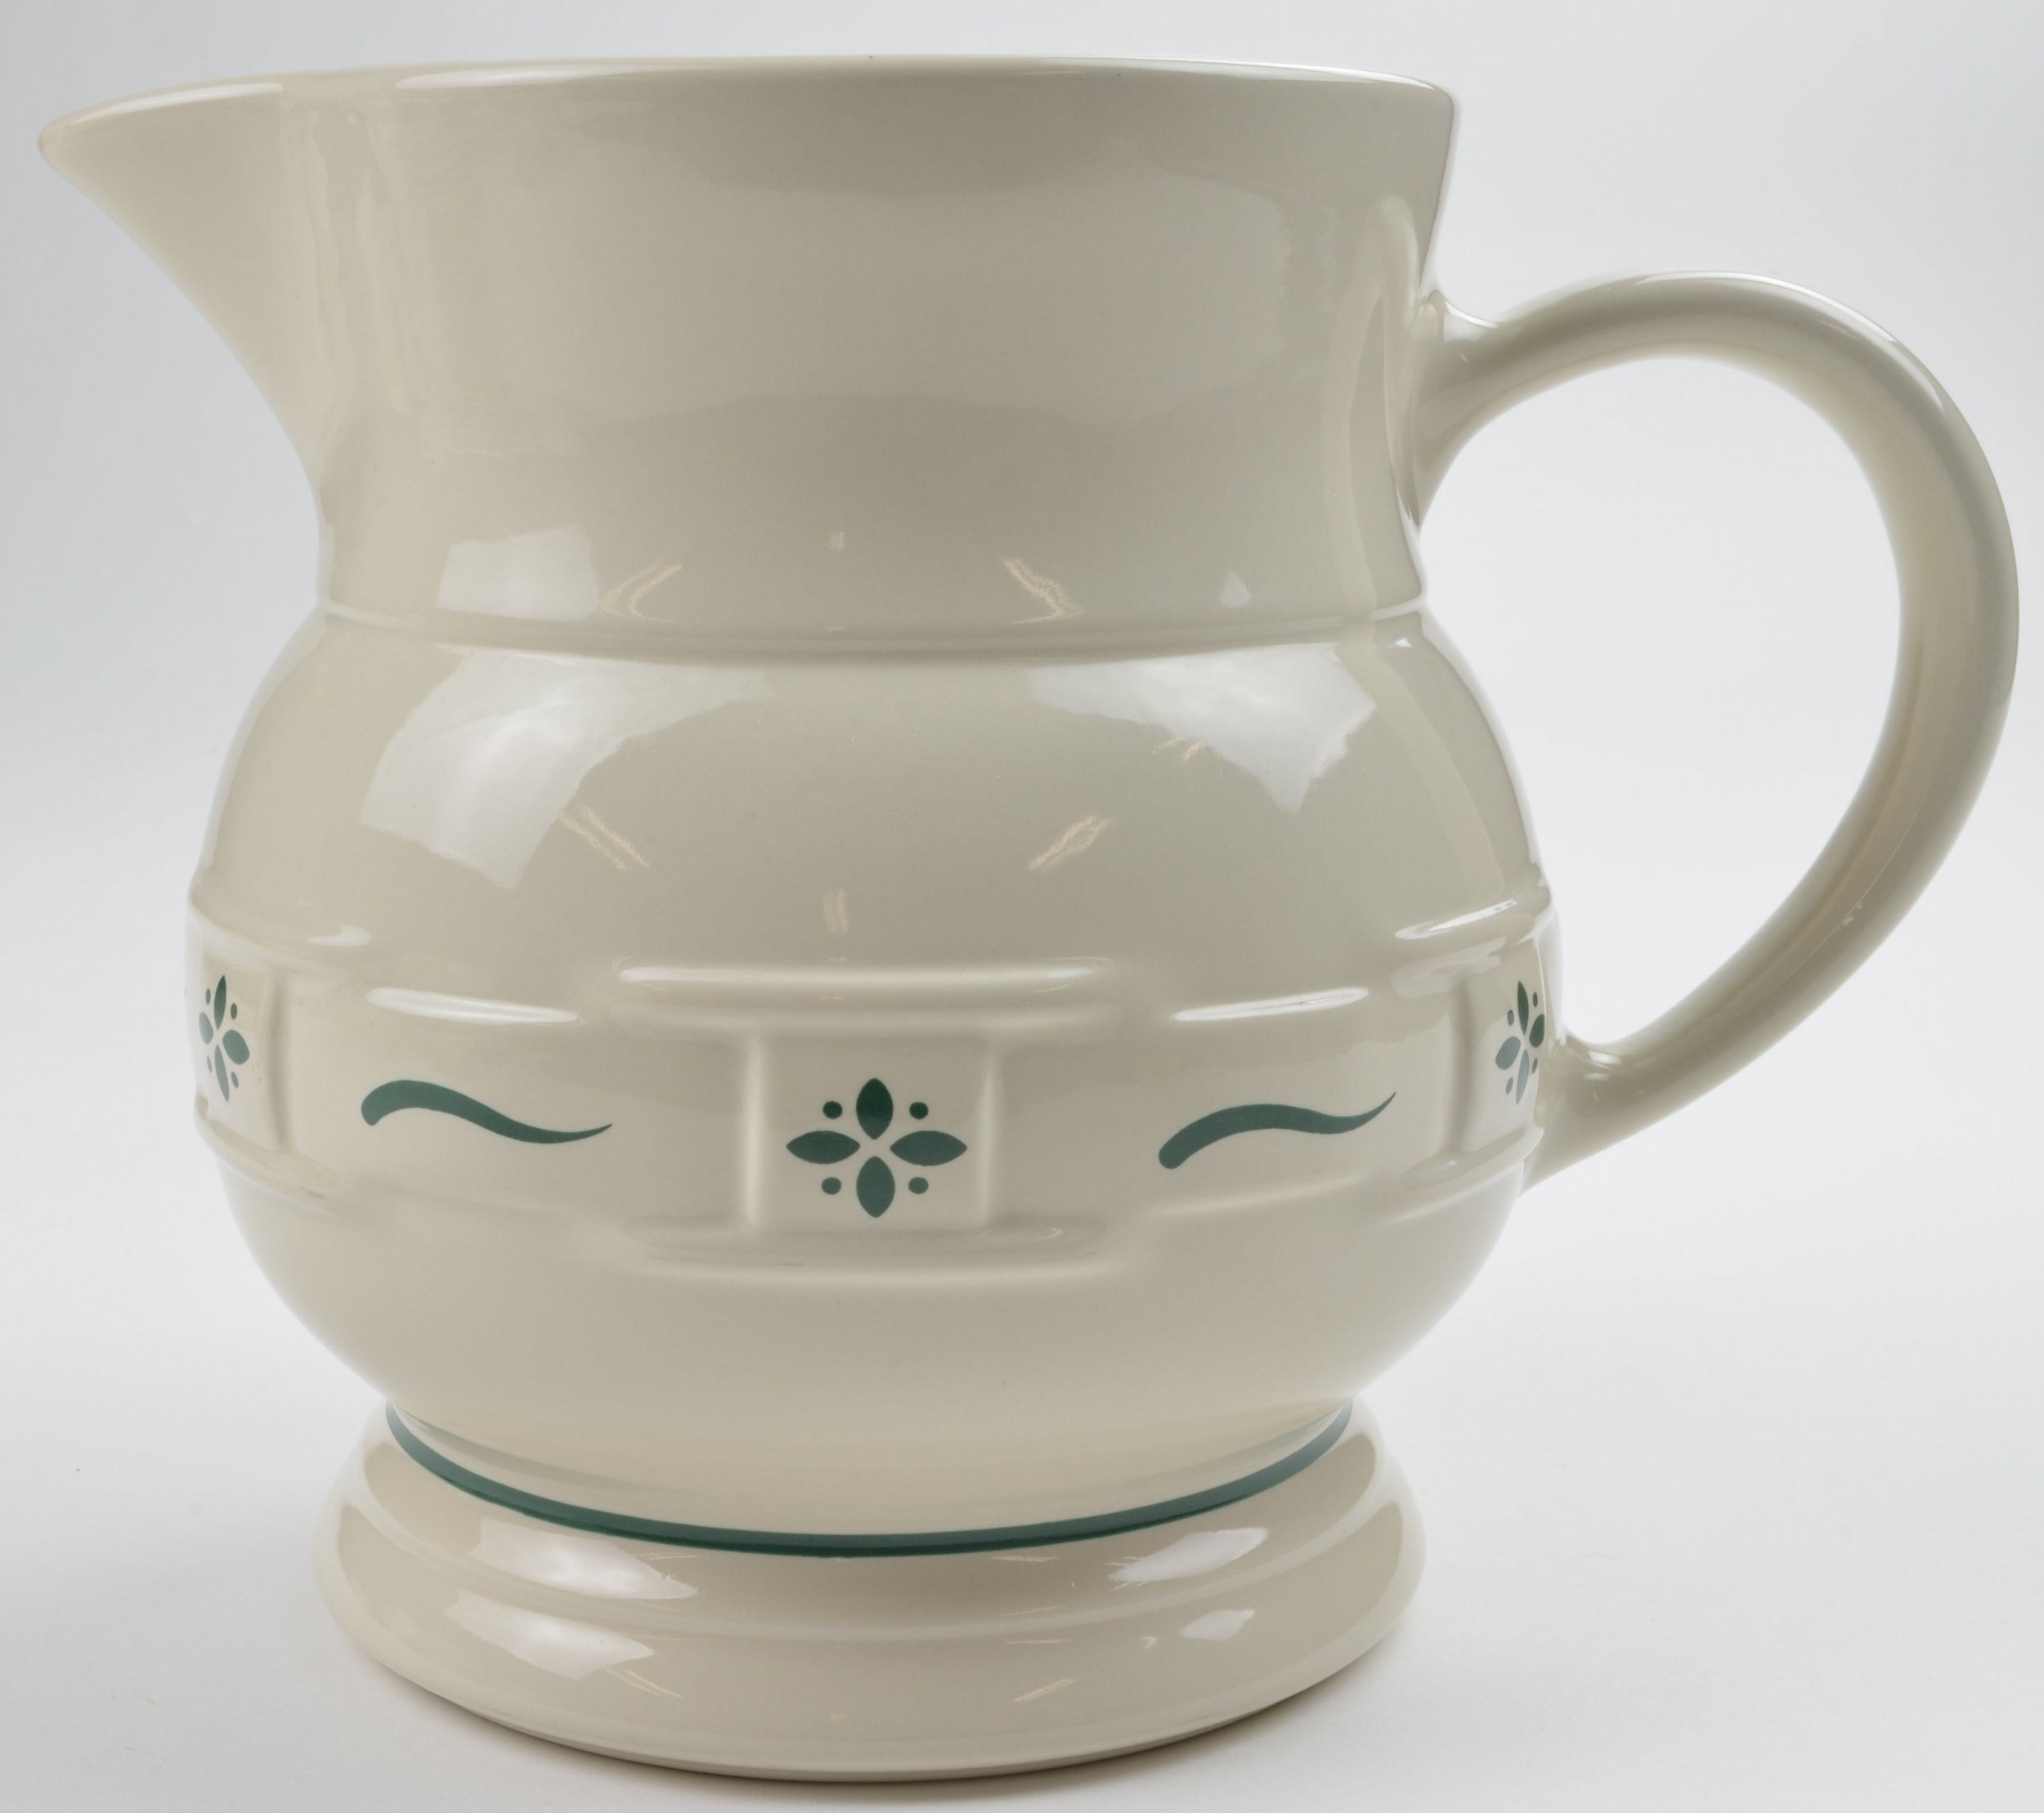 Longaberger Pottery  64 Oz Pitcher, Woven Traditions Heritage Green